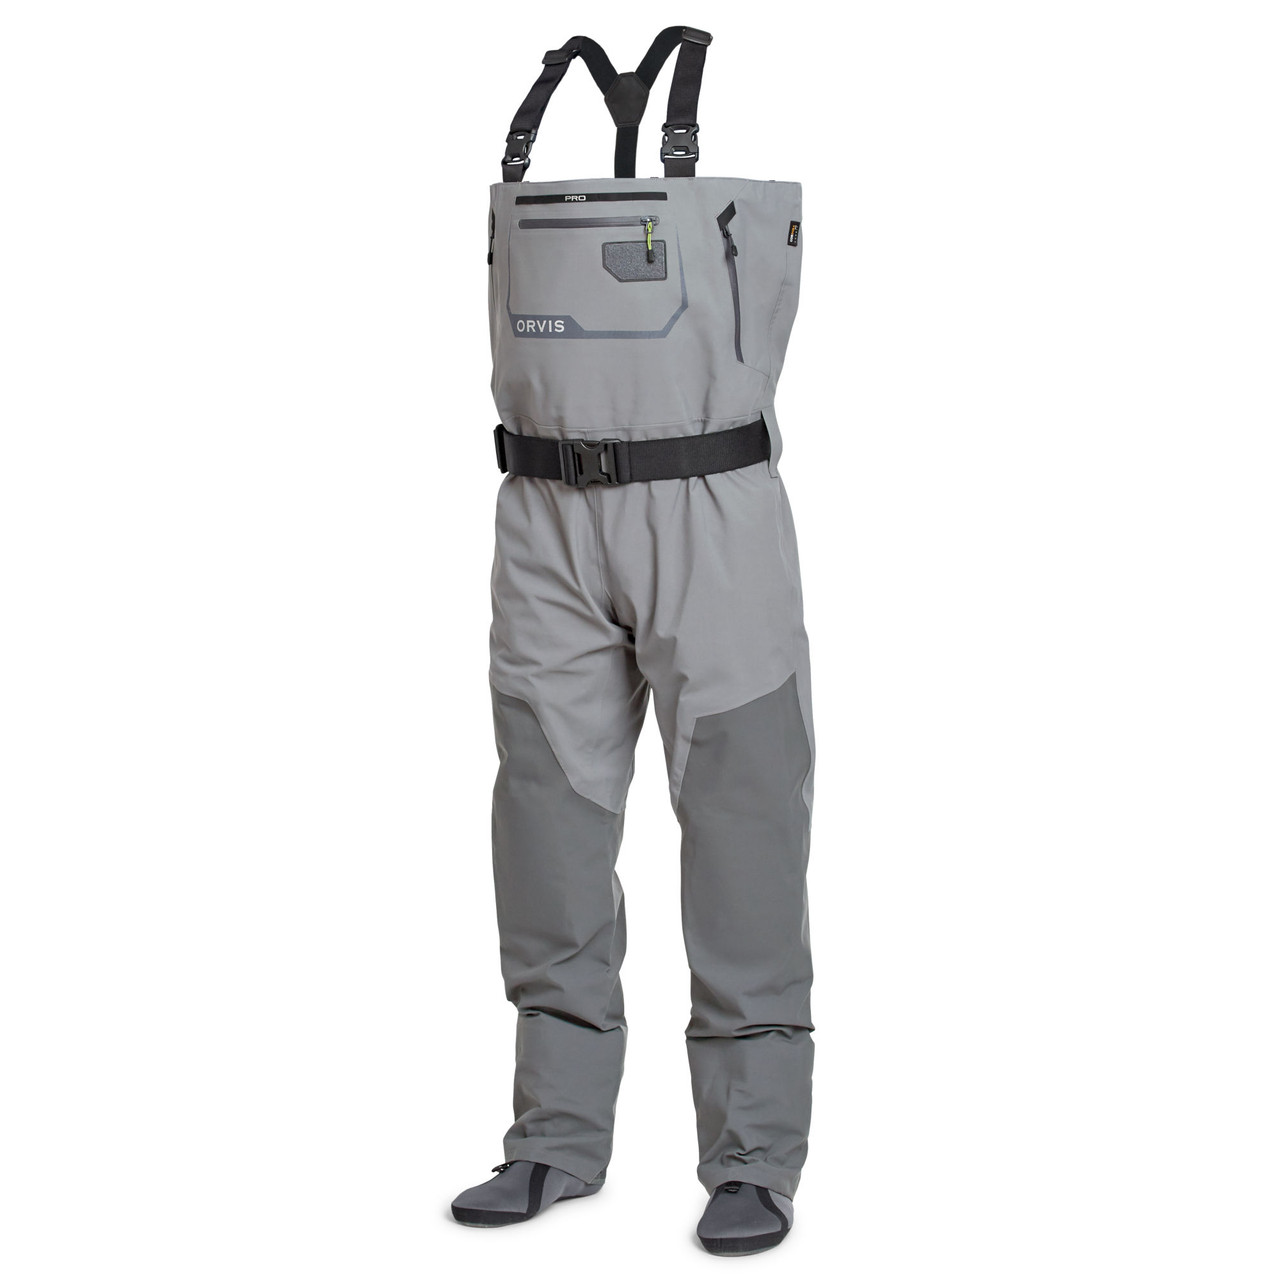 Fishing Waders for Men for sale in Victoria, British Columbia